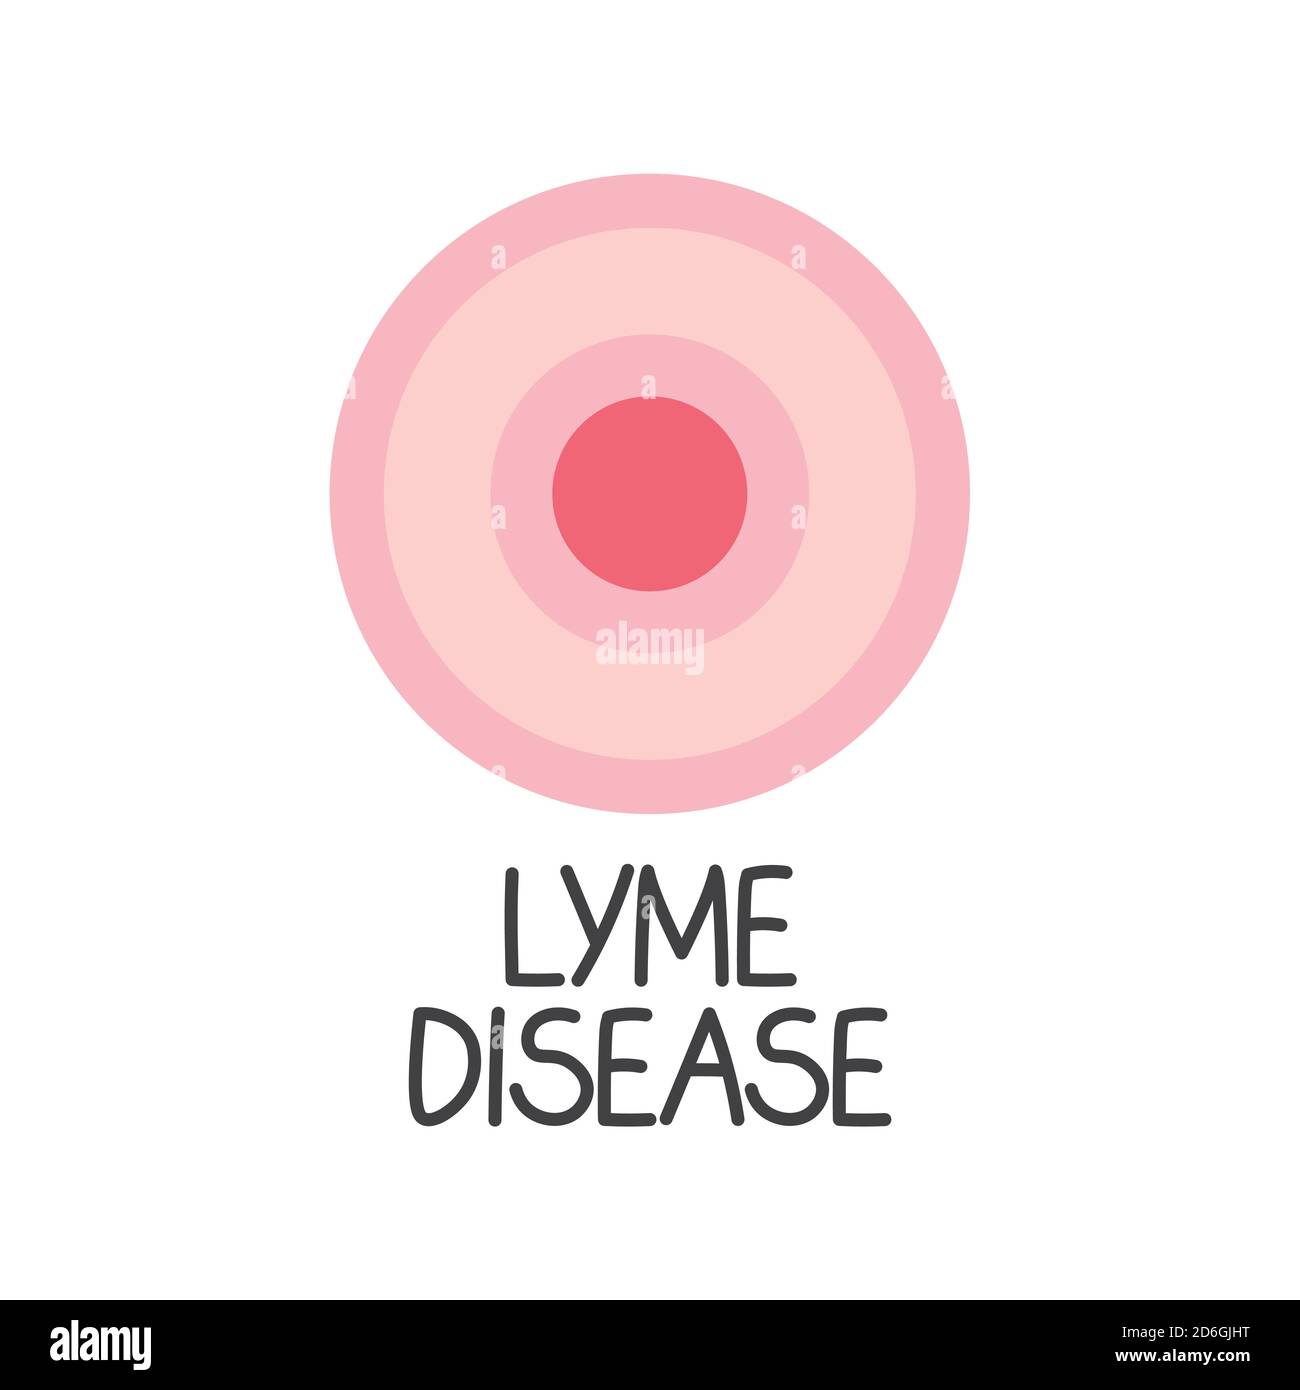 lyme disease text and erythema migrans rash concept- vector illustration Stock Vector